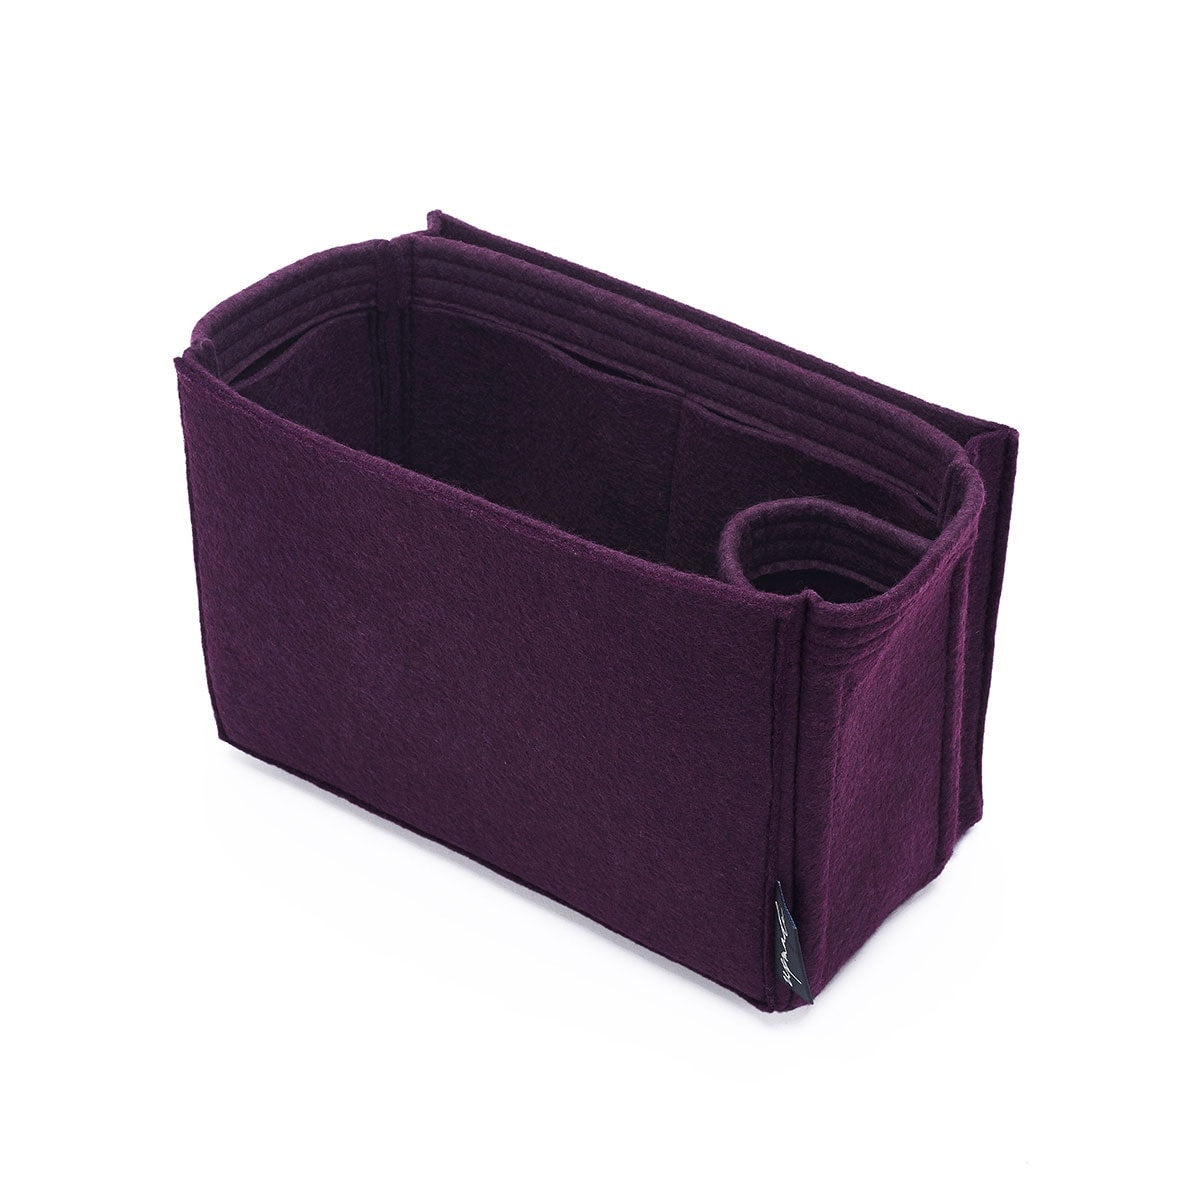 Custom Size Bag Organizer with Laptop Compartment and Pen Holder